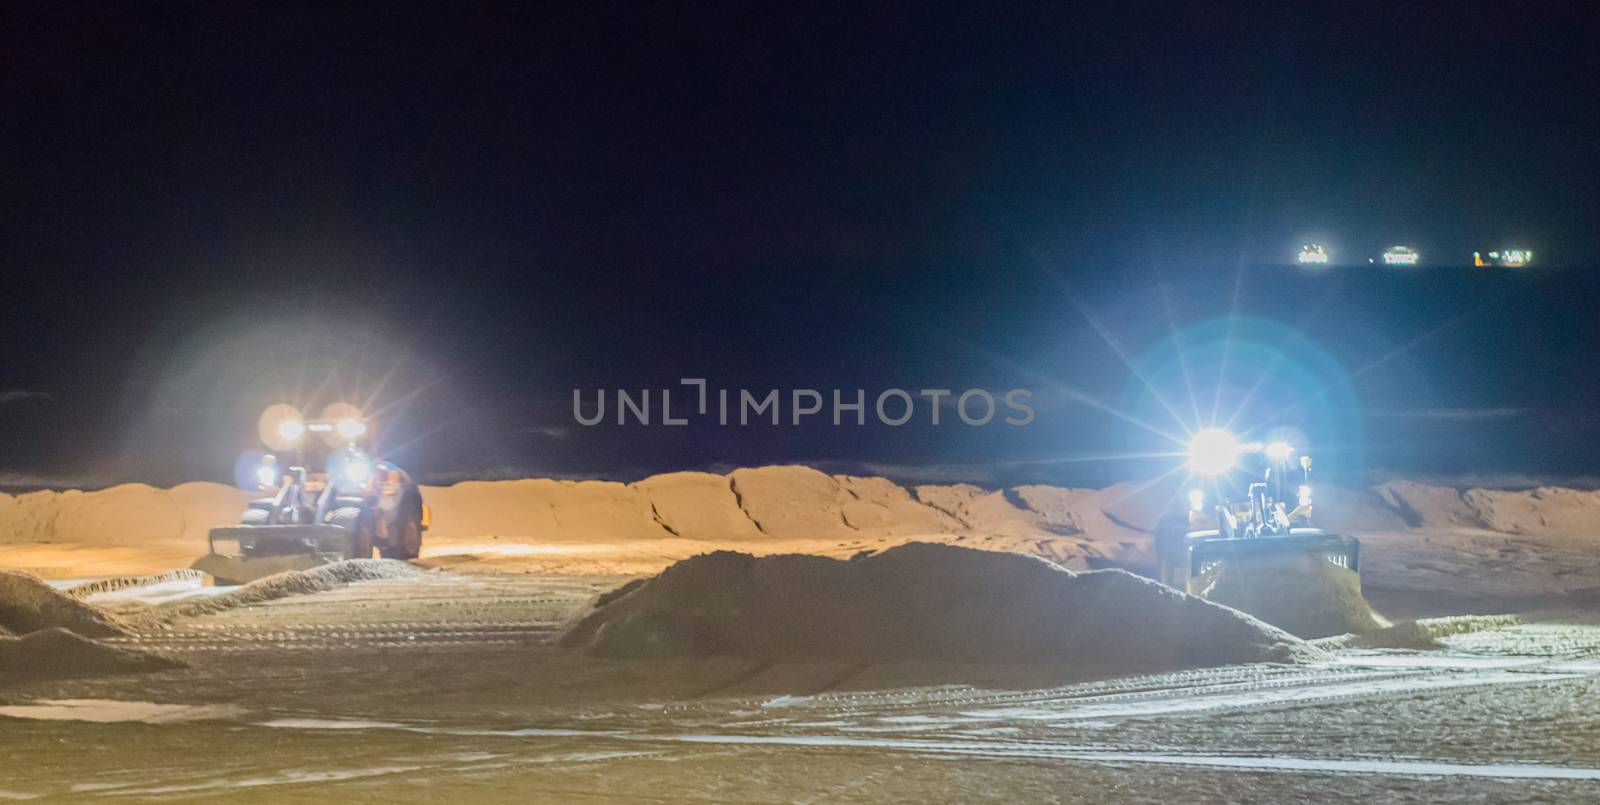 two ground workers working at night in bulldozers at the beach moving the sand